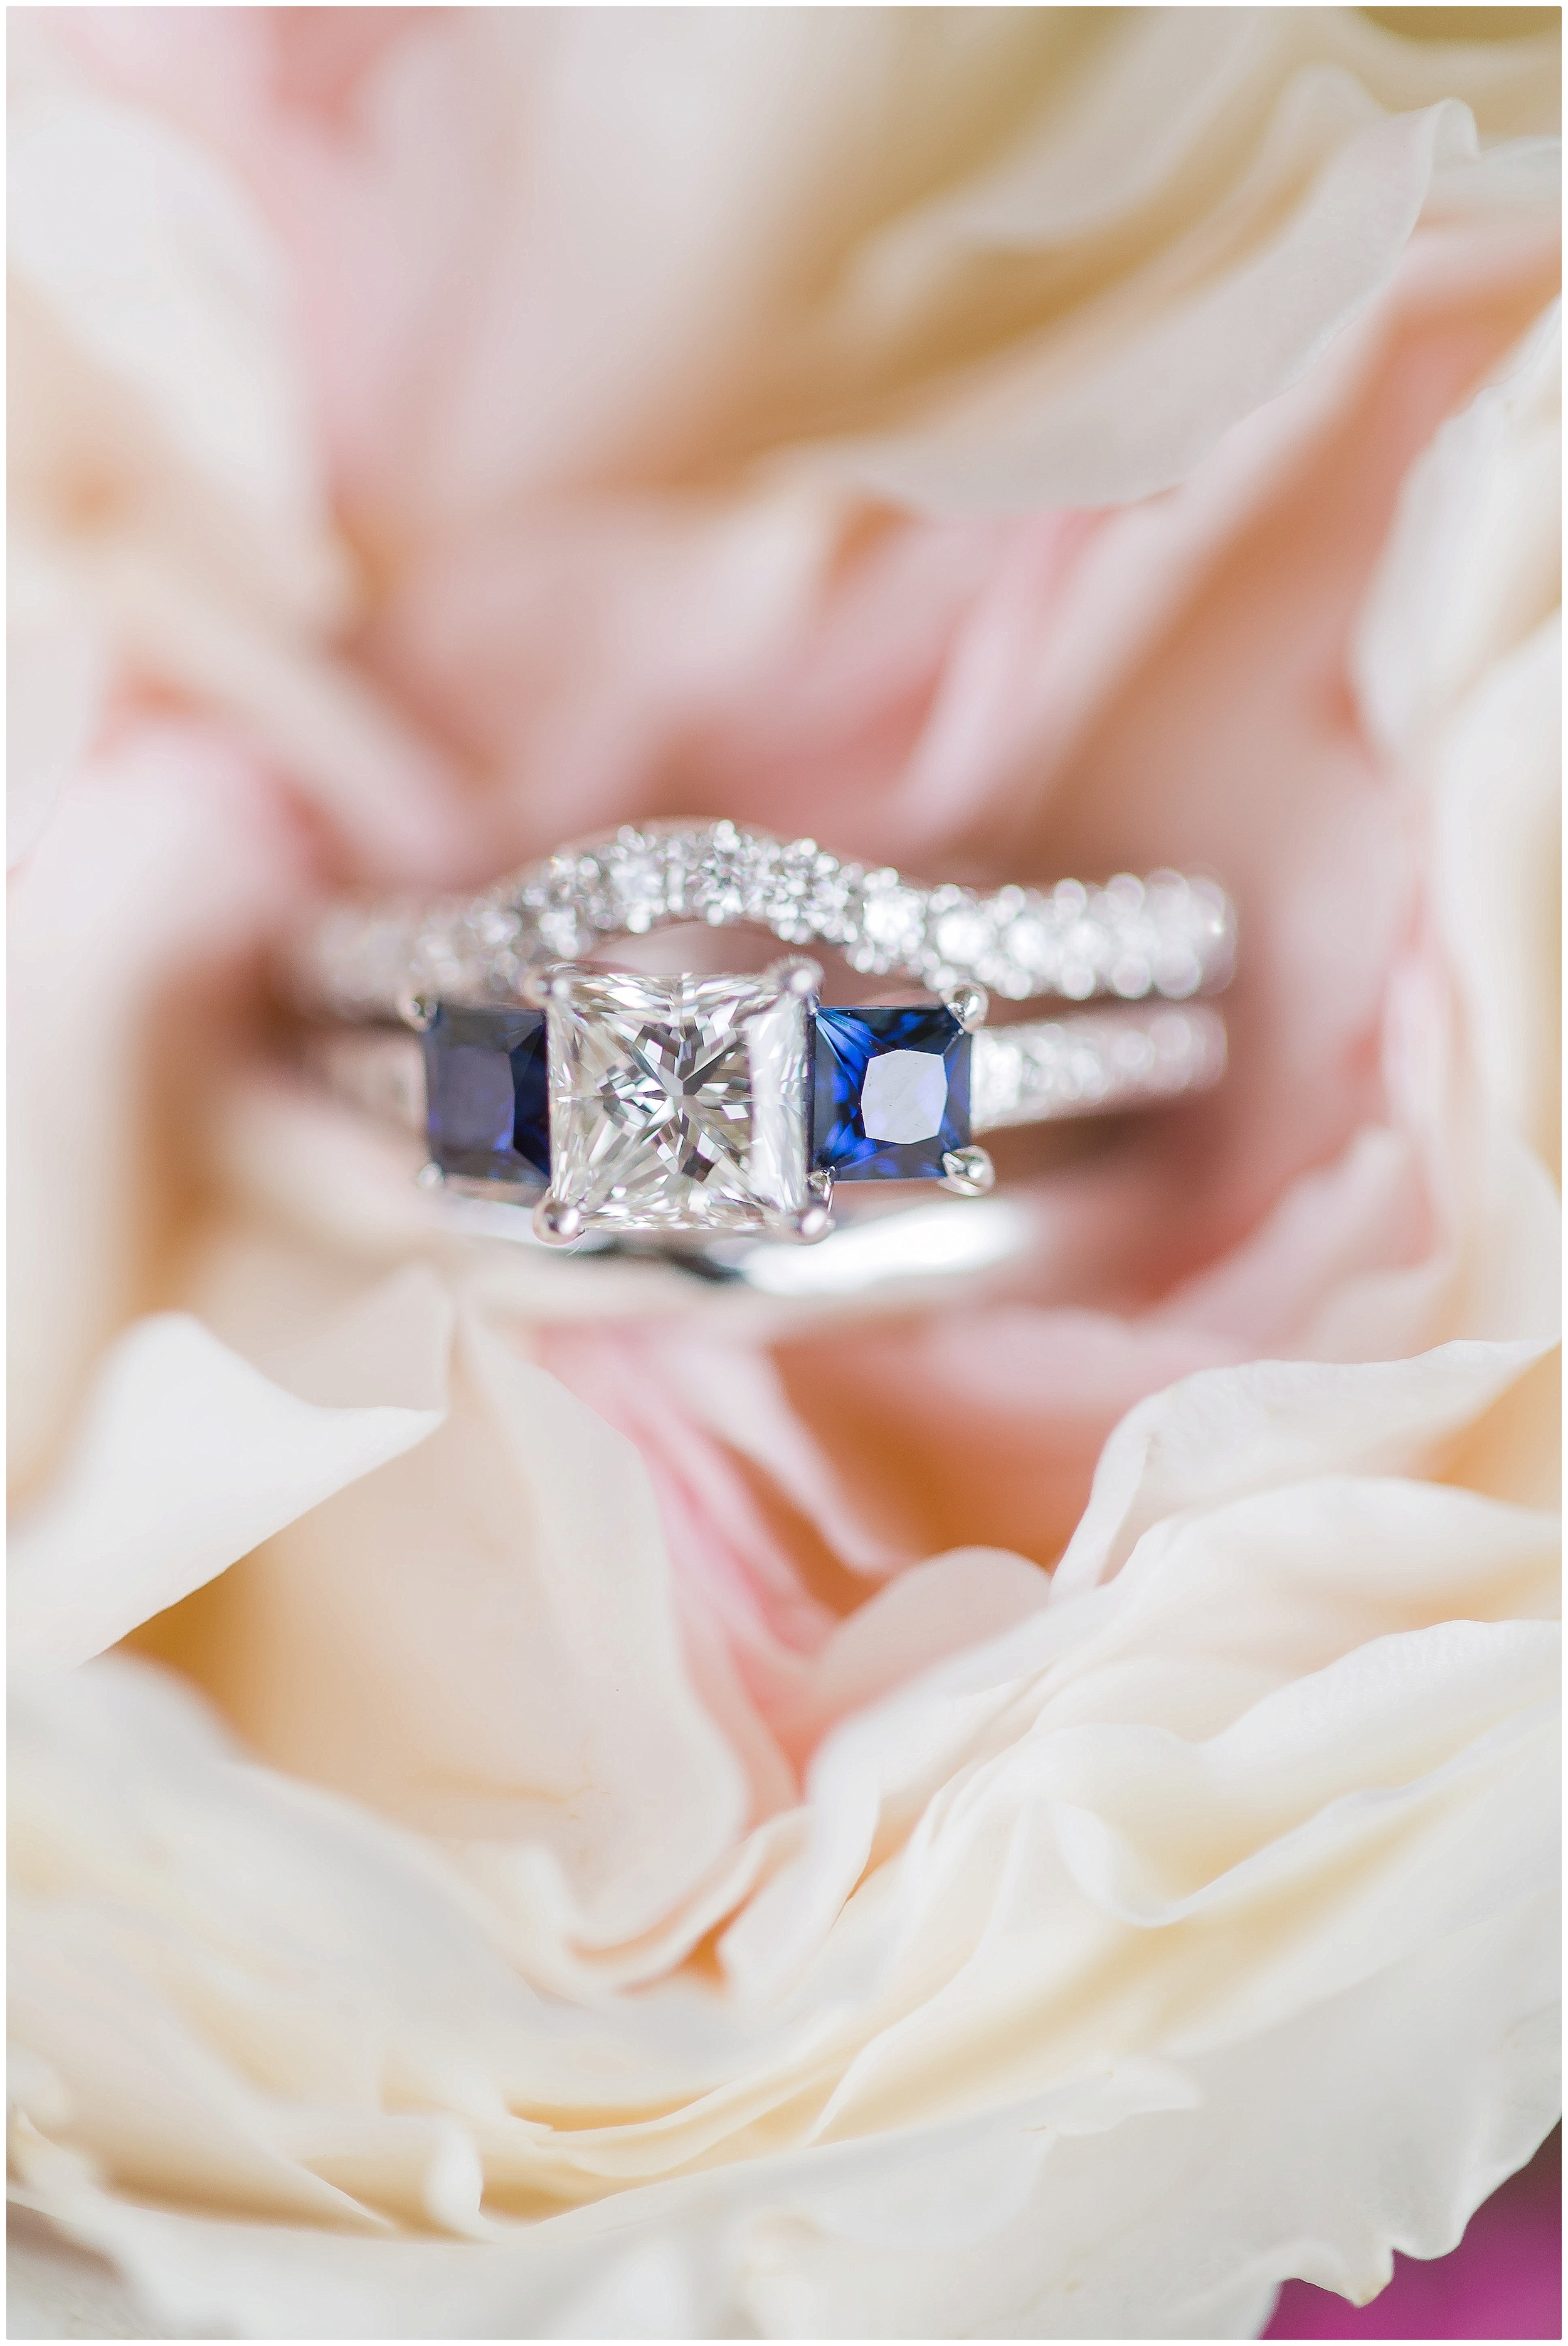 Sapphire Engagement Ring and Wedding Band in David Austin Roses - Romantic Vintage Affair Wedding. 